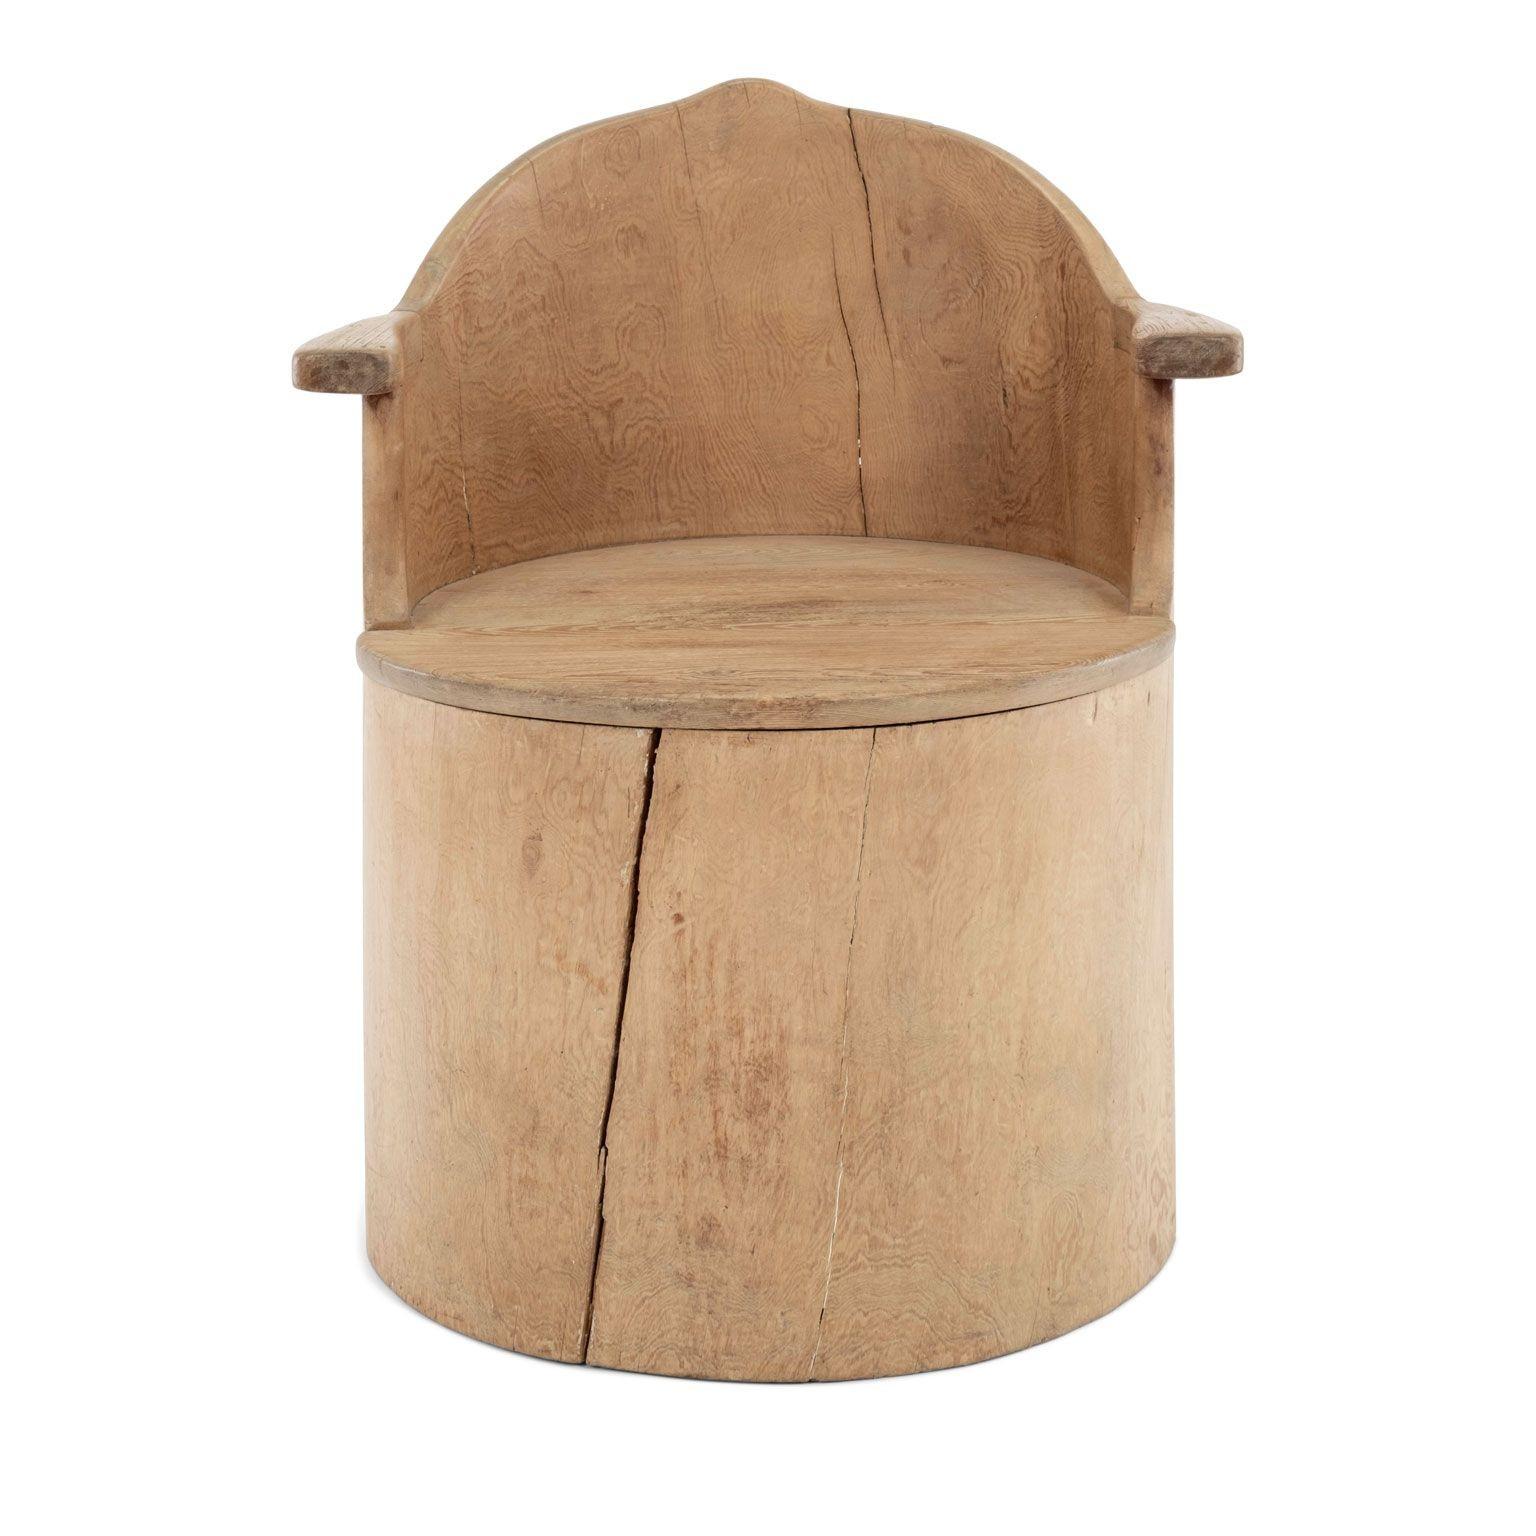 Swedish dug-out chair, or kubbestol, circa 1910. Traditional Scandinavian folk art chair made from a log, from central Sweden. Rustic fruitwood barrel-shape body with arms and seat from pine. All hand-carved. Nice dry, pale patina and finish.